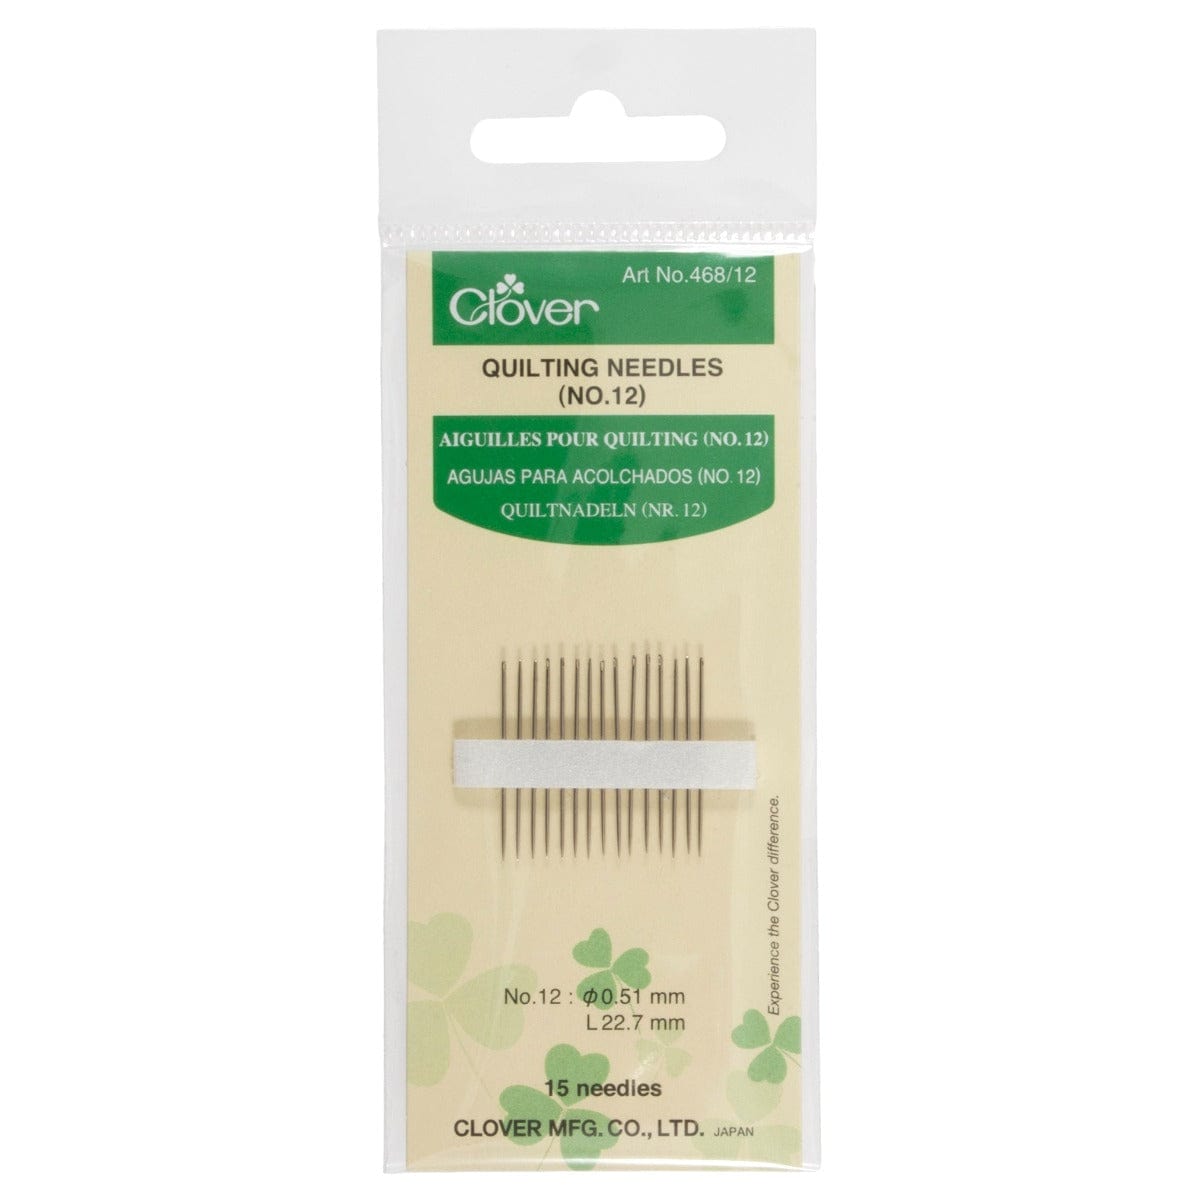 Hand Sewing Needles: Quilting Needles: Pack of 15